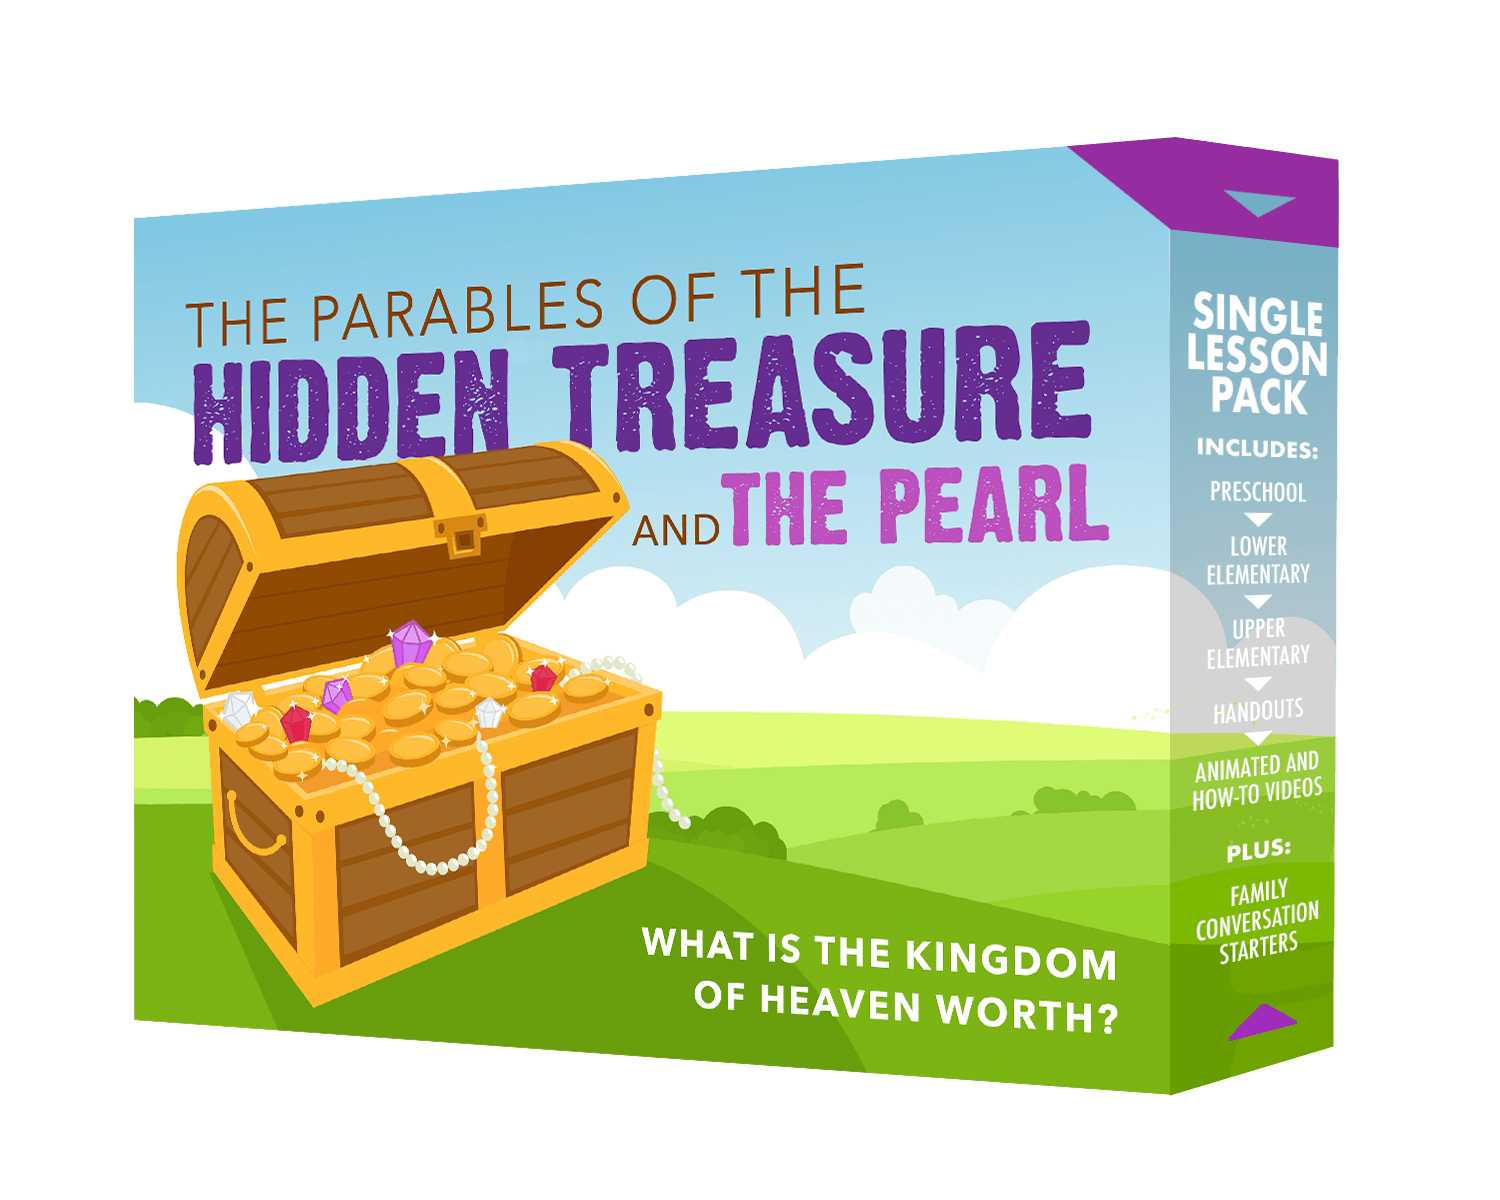 The Parables of the Hidden Treasure and the Pearl